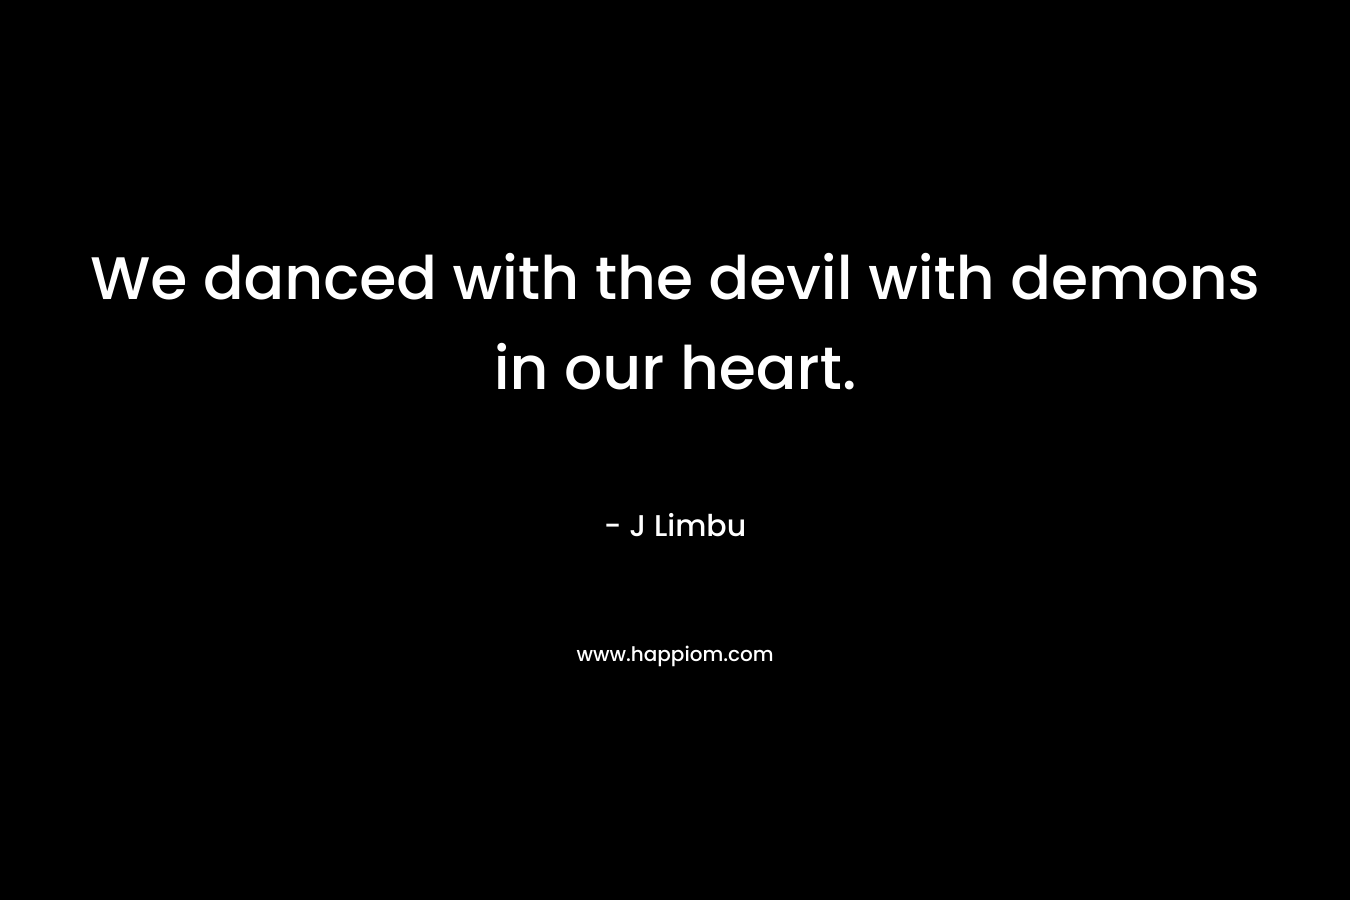 We danced with the devil with demons in our heart. – J Limbu